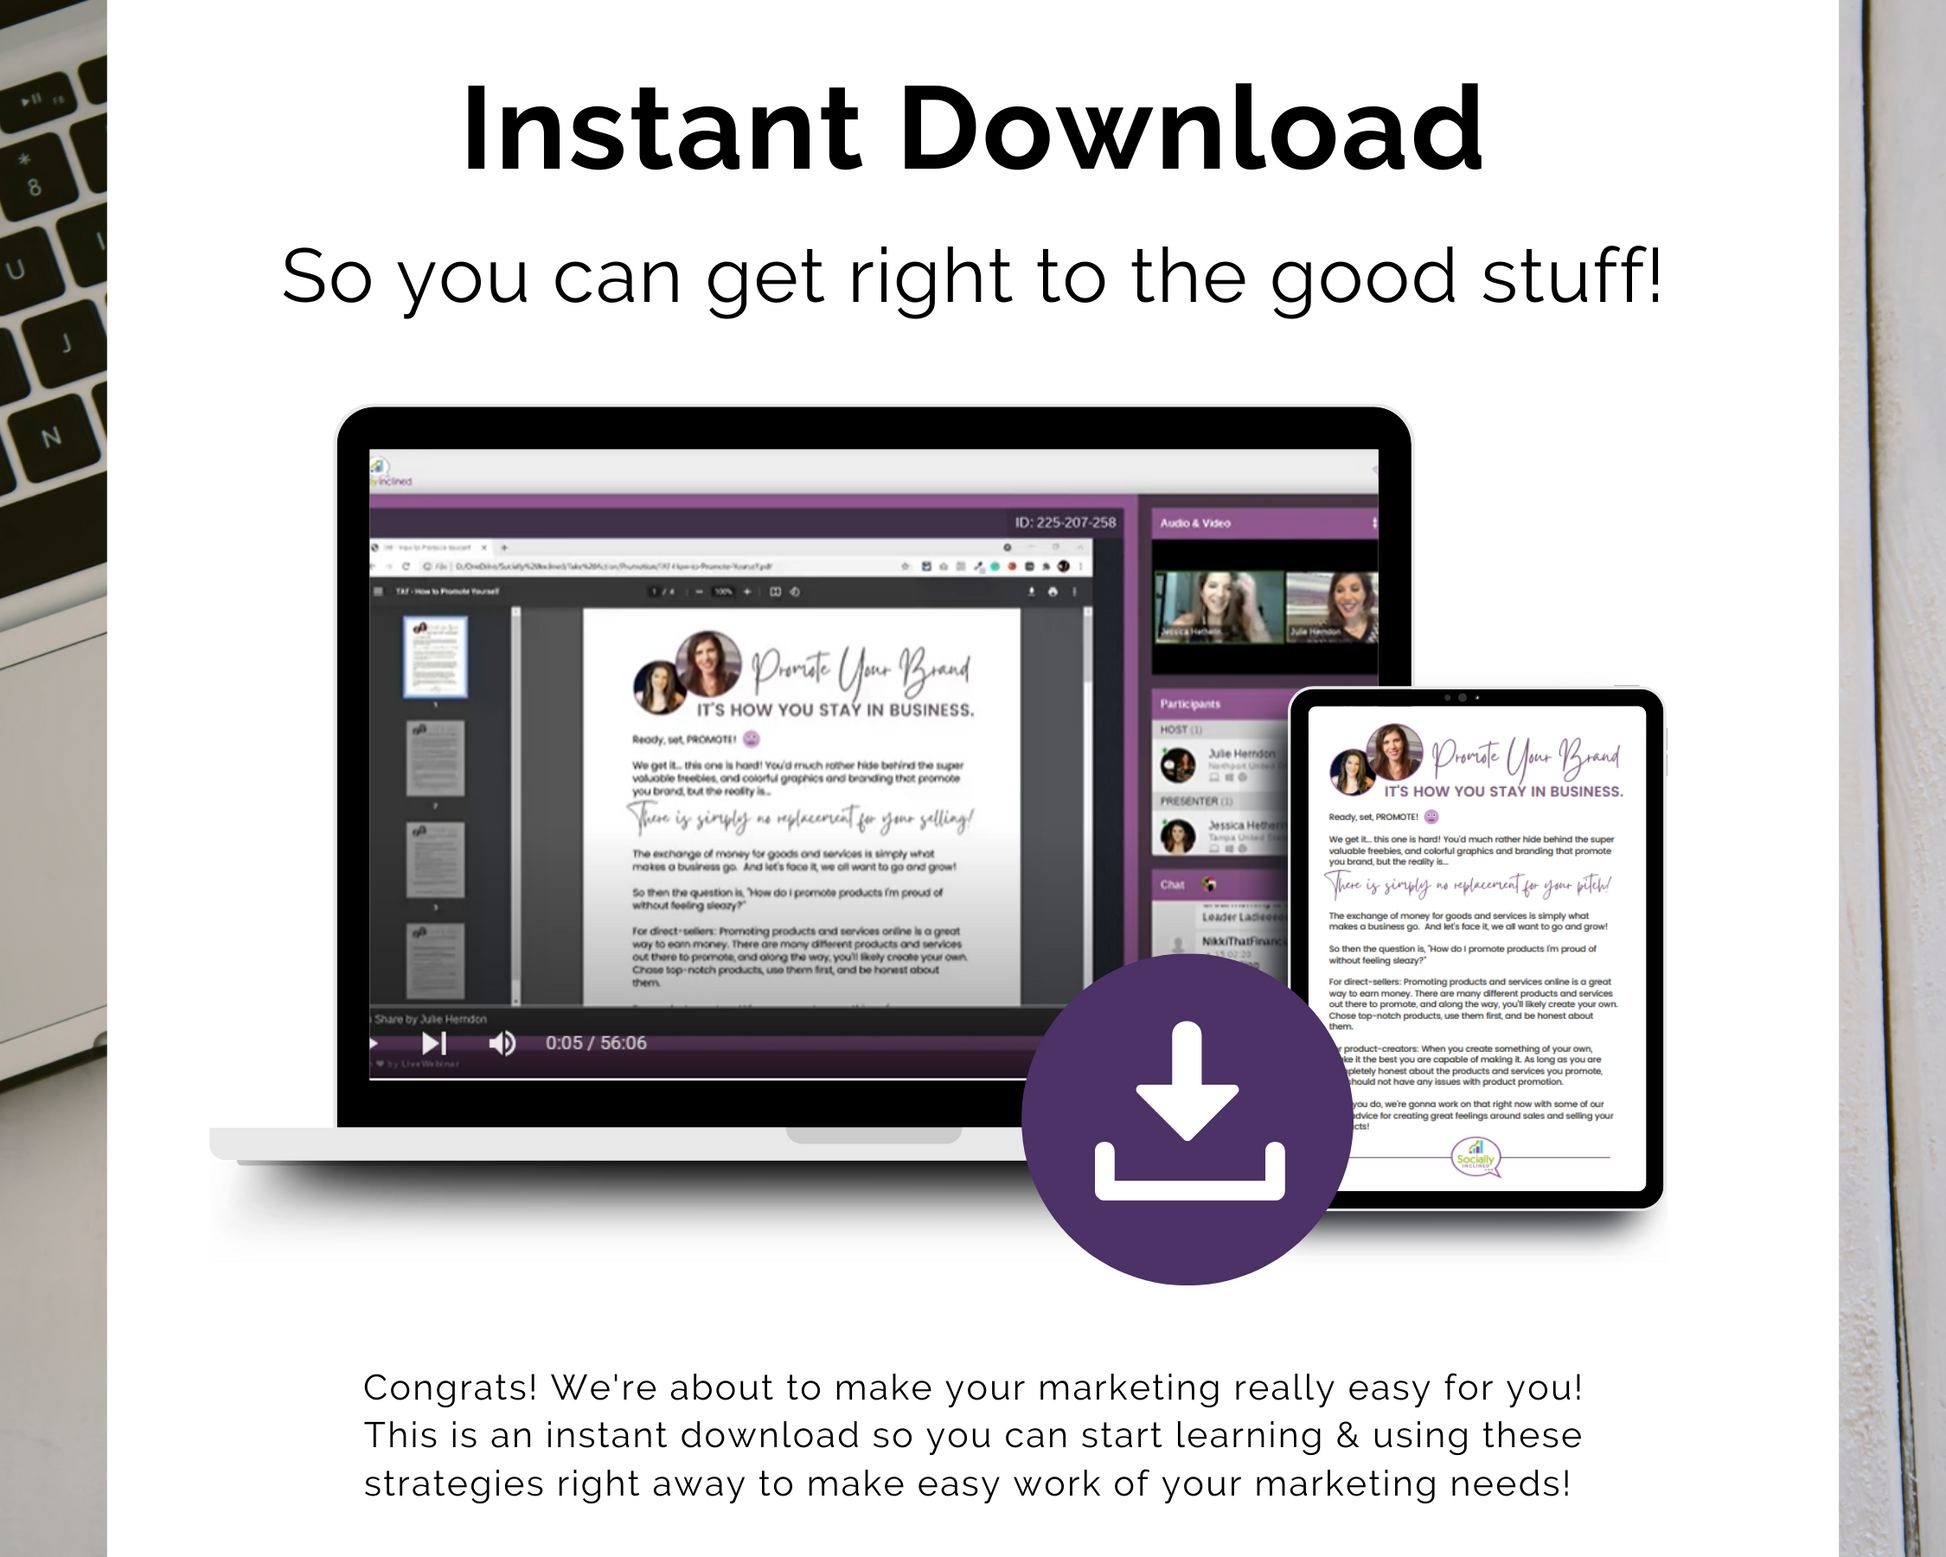 Instant download for fast and efficient results. Designed for personal and professional use, this sleek TAT - Promoting Your Brand Masterclass by Get Socially Inclined offers a user-friendly interface to easily navigate and operate. It includes multiple features and functionalities, including a